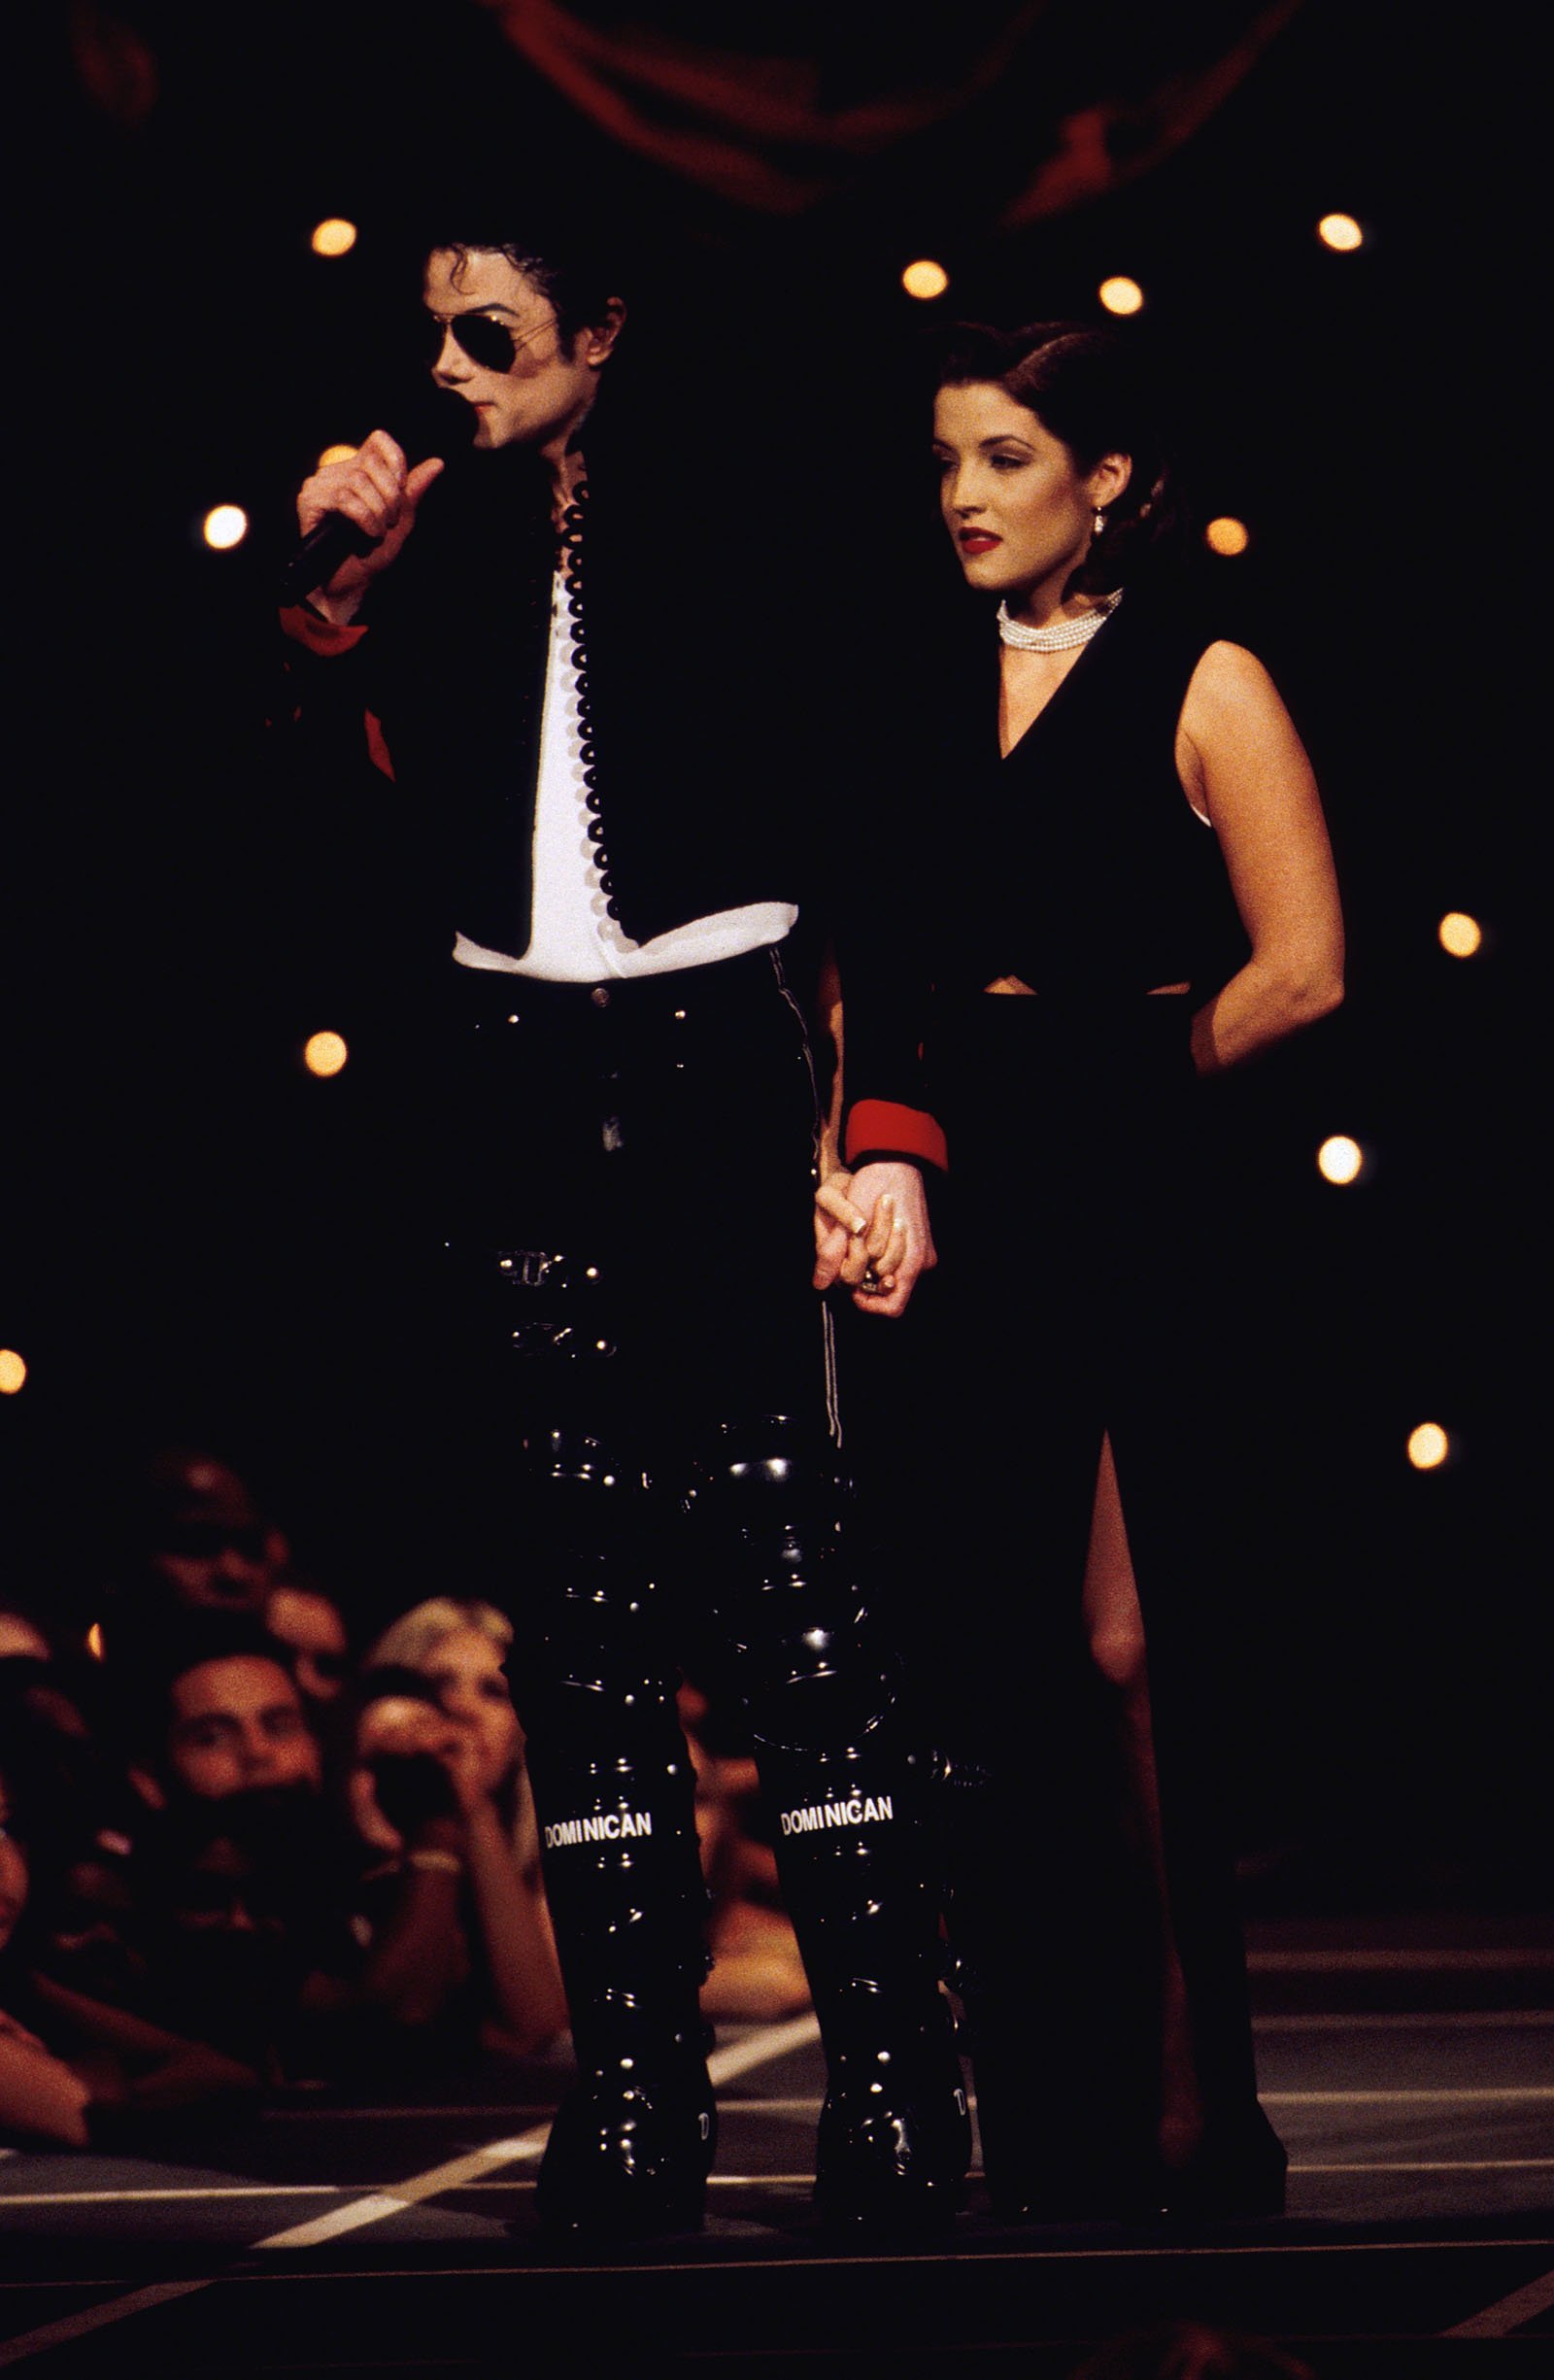 Michael Jackson and Lisa Marie Presley at the MTV Video Music Awards | Source: Getty Images